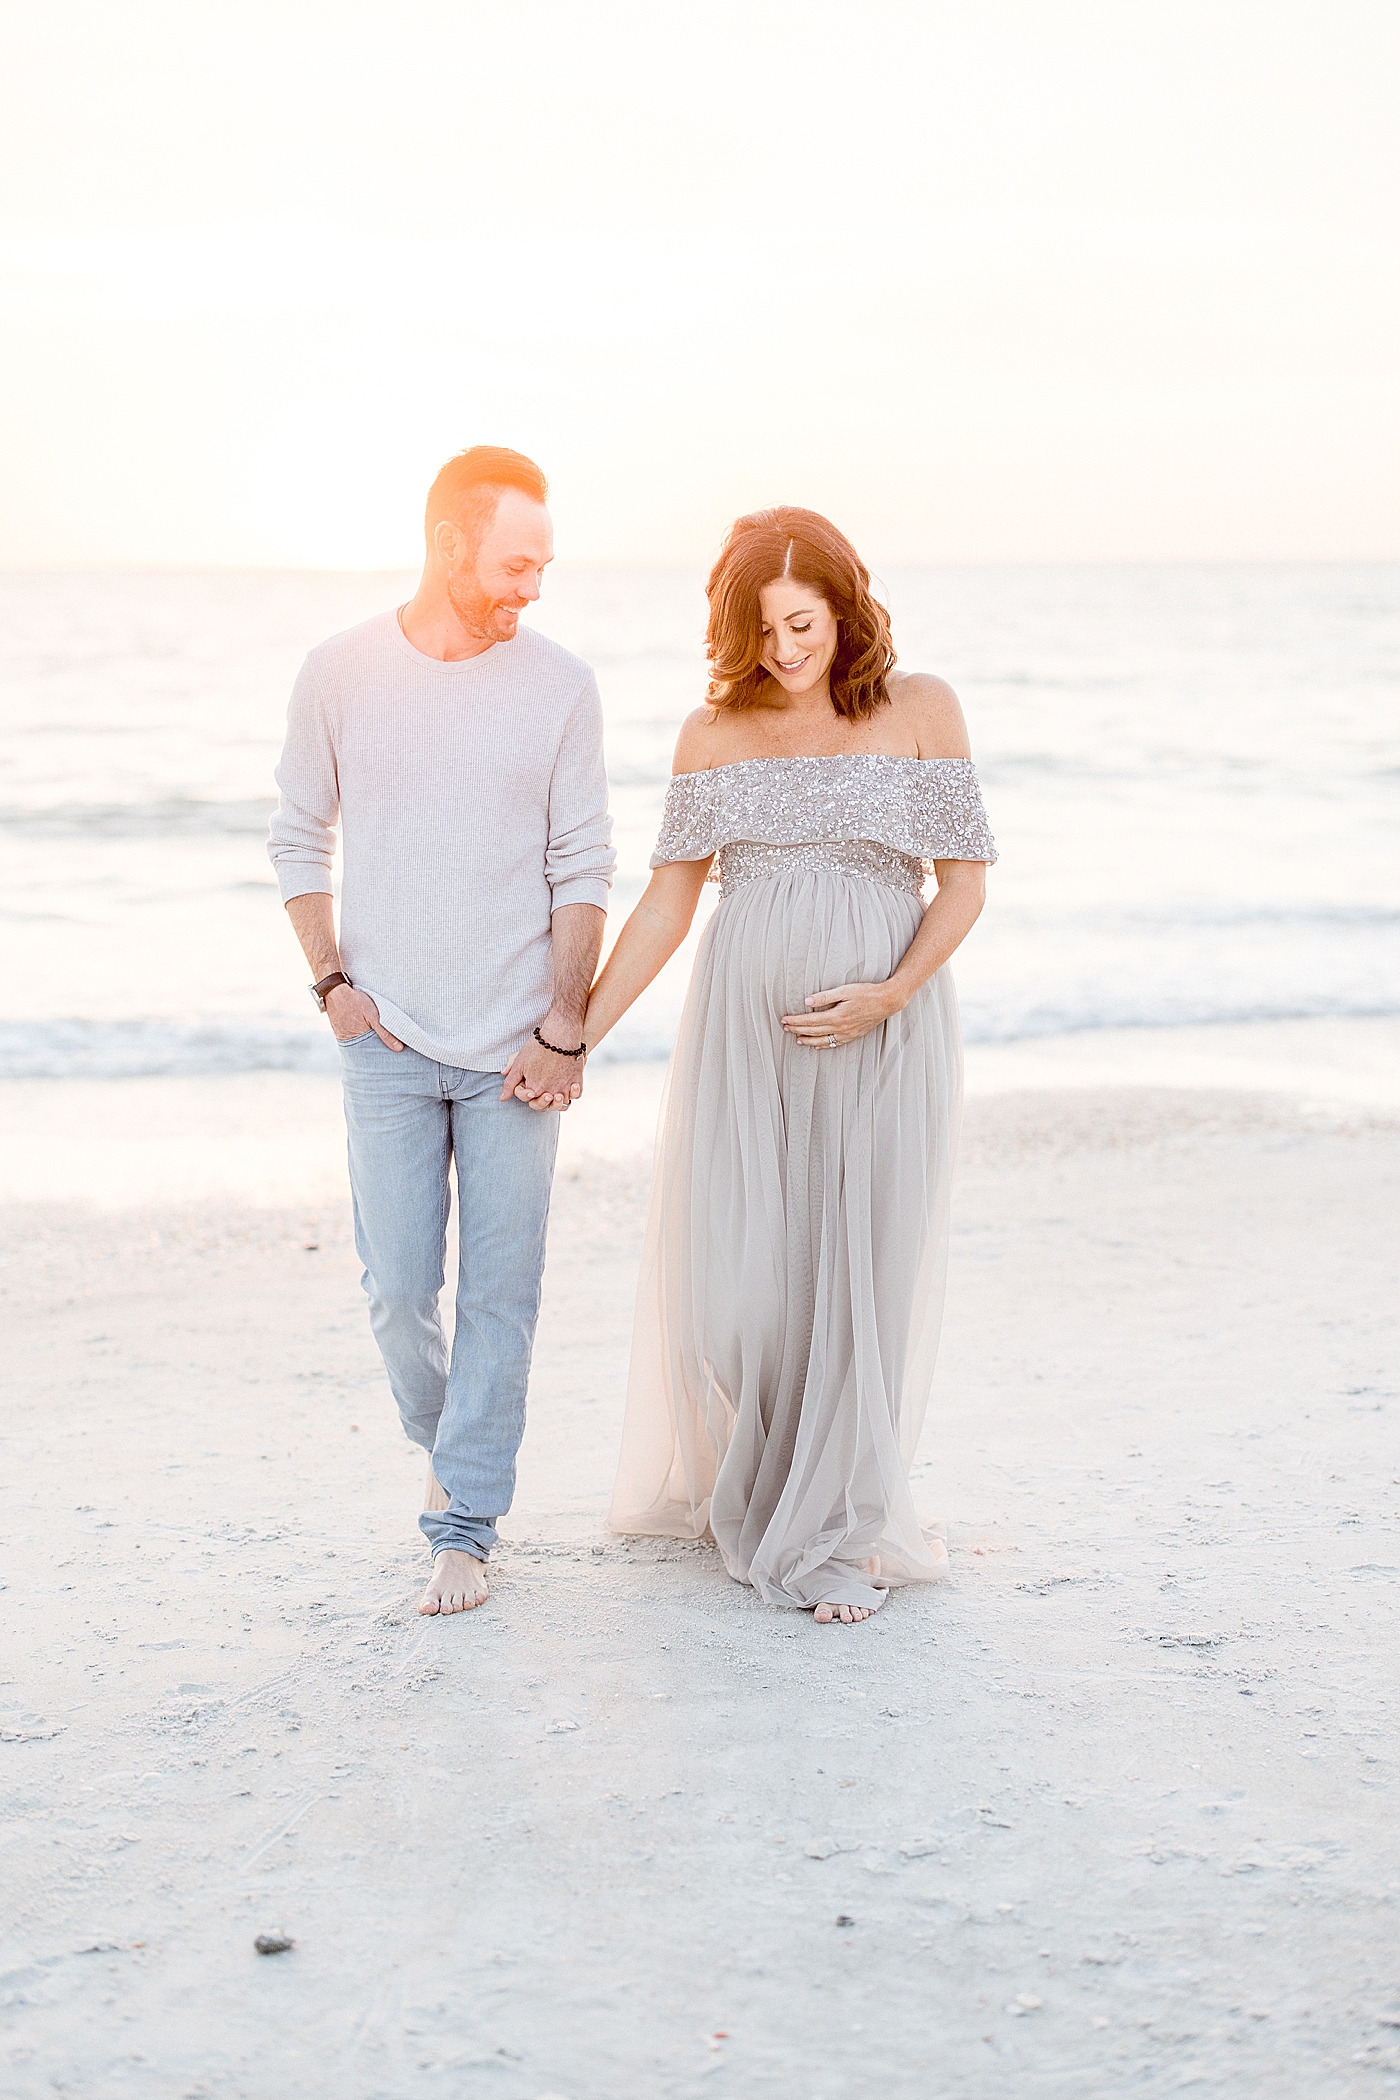 Golden hour maternity session in St. Pete Beach. Photo by Brittany Elise Photography.